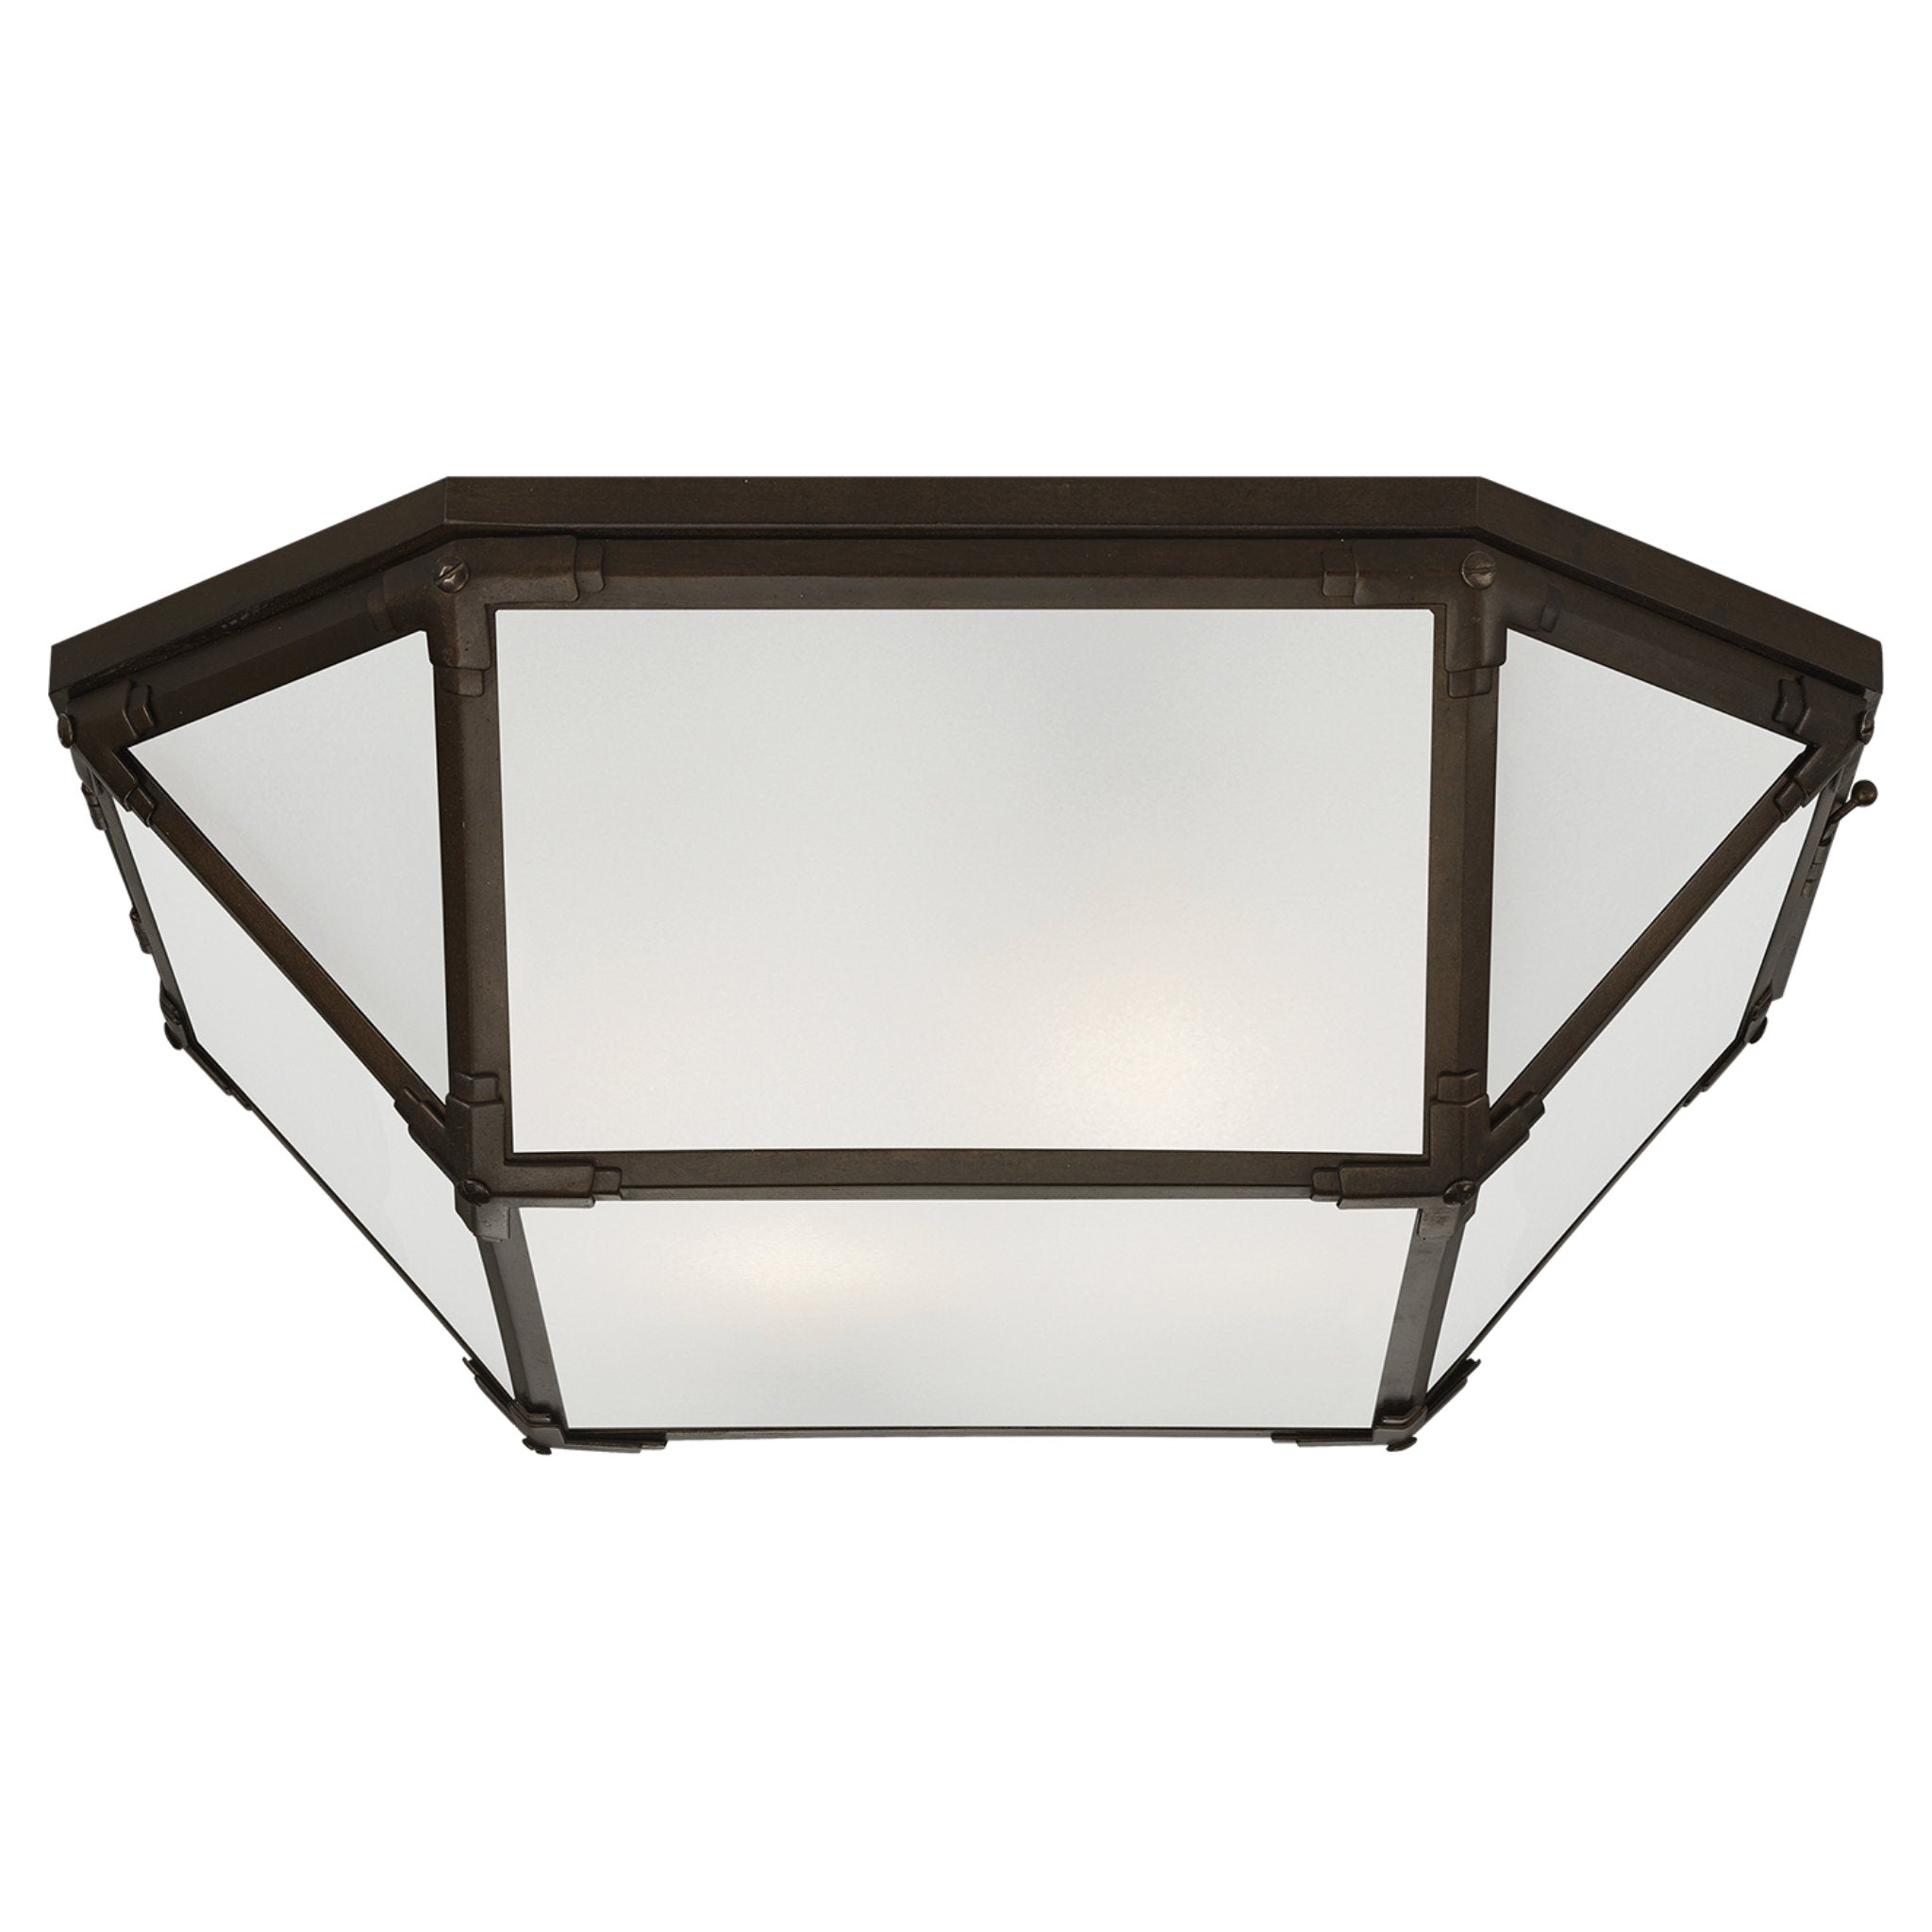 Suzanne Kasler Morris Large Flush Mount in Antique Zinc with Frosted Glass